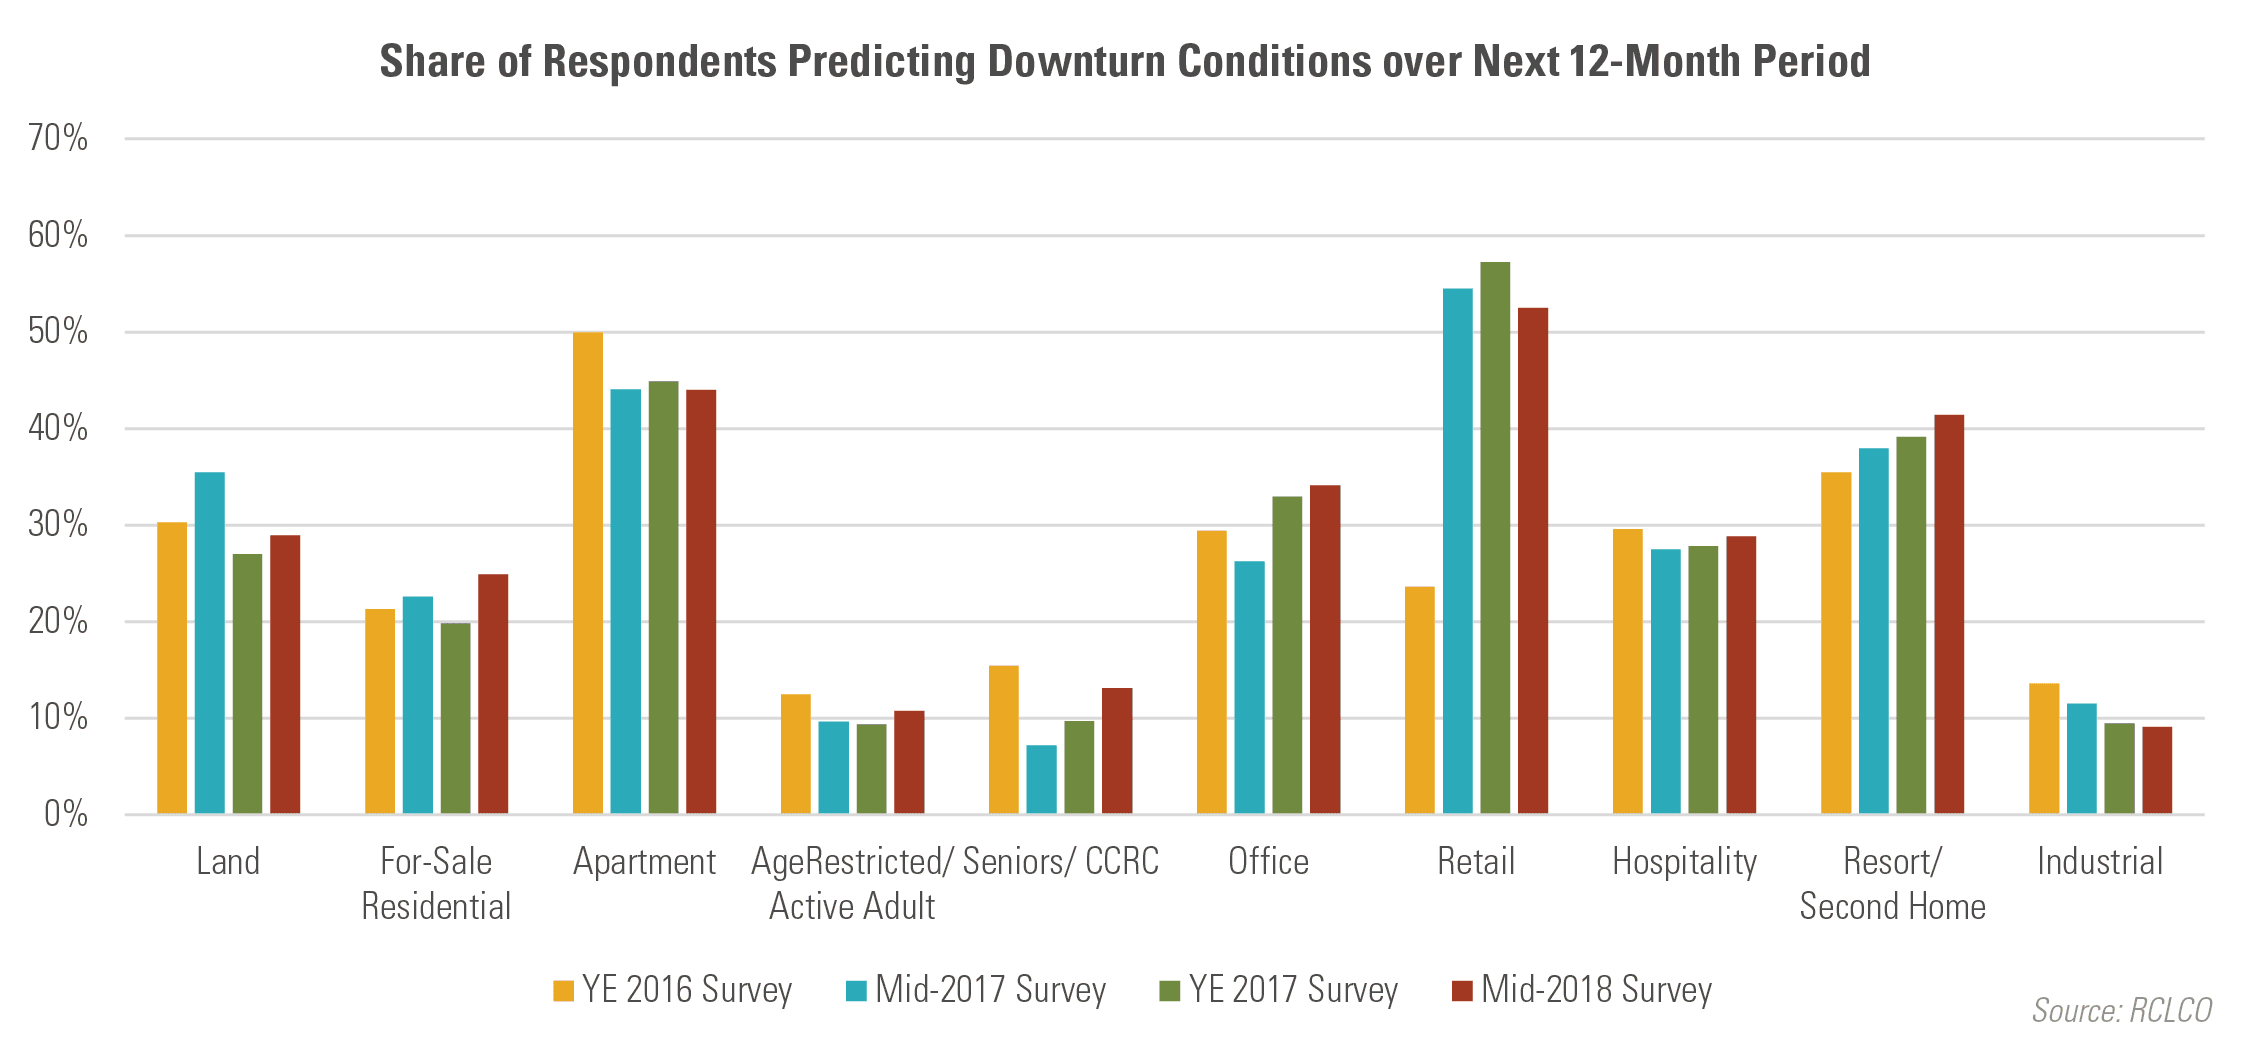 Share of Respondents Predicting Downturn Condtions over Next 12-Month Period